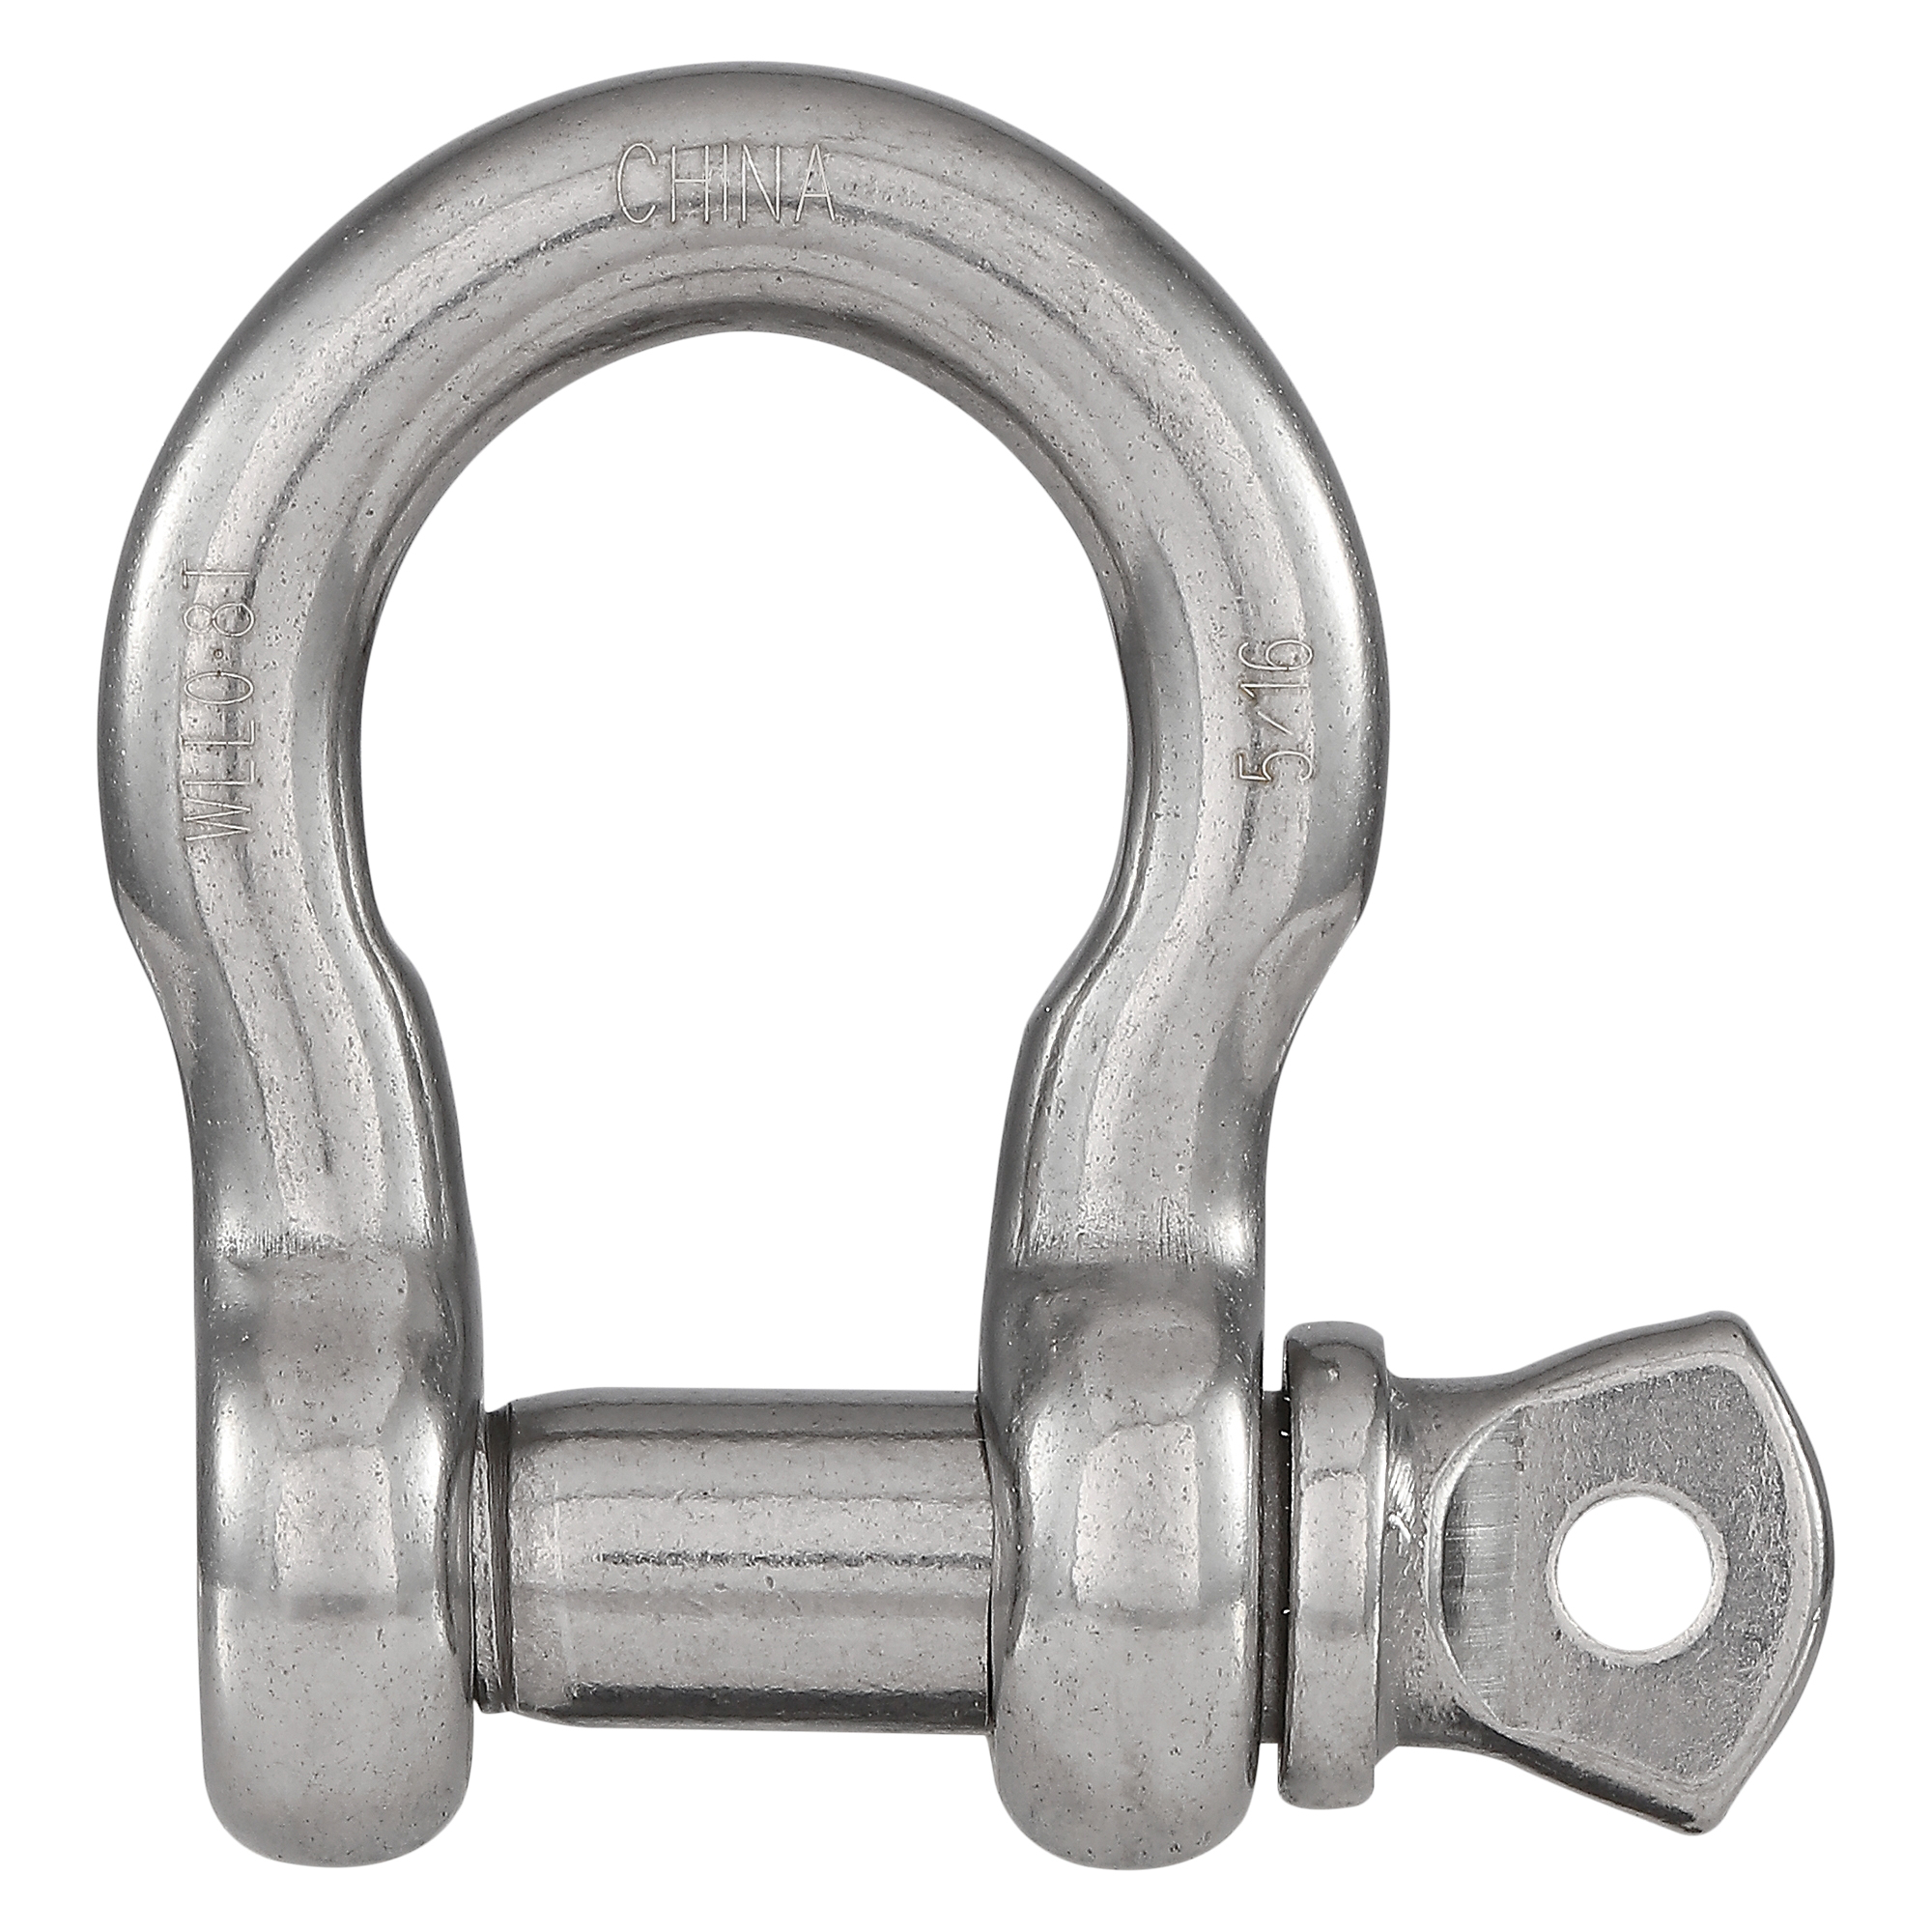 N100-279 Anchor Shackle, 5/16 in Trade, 1650 lb Working Load, 9/32 in Dia Wire, 316 Grade